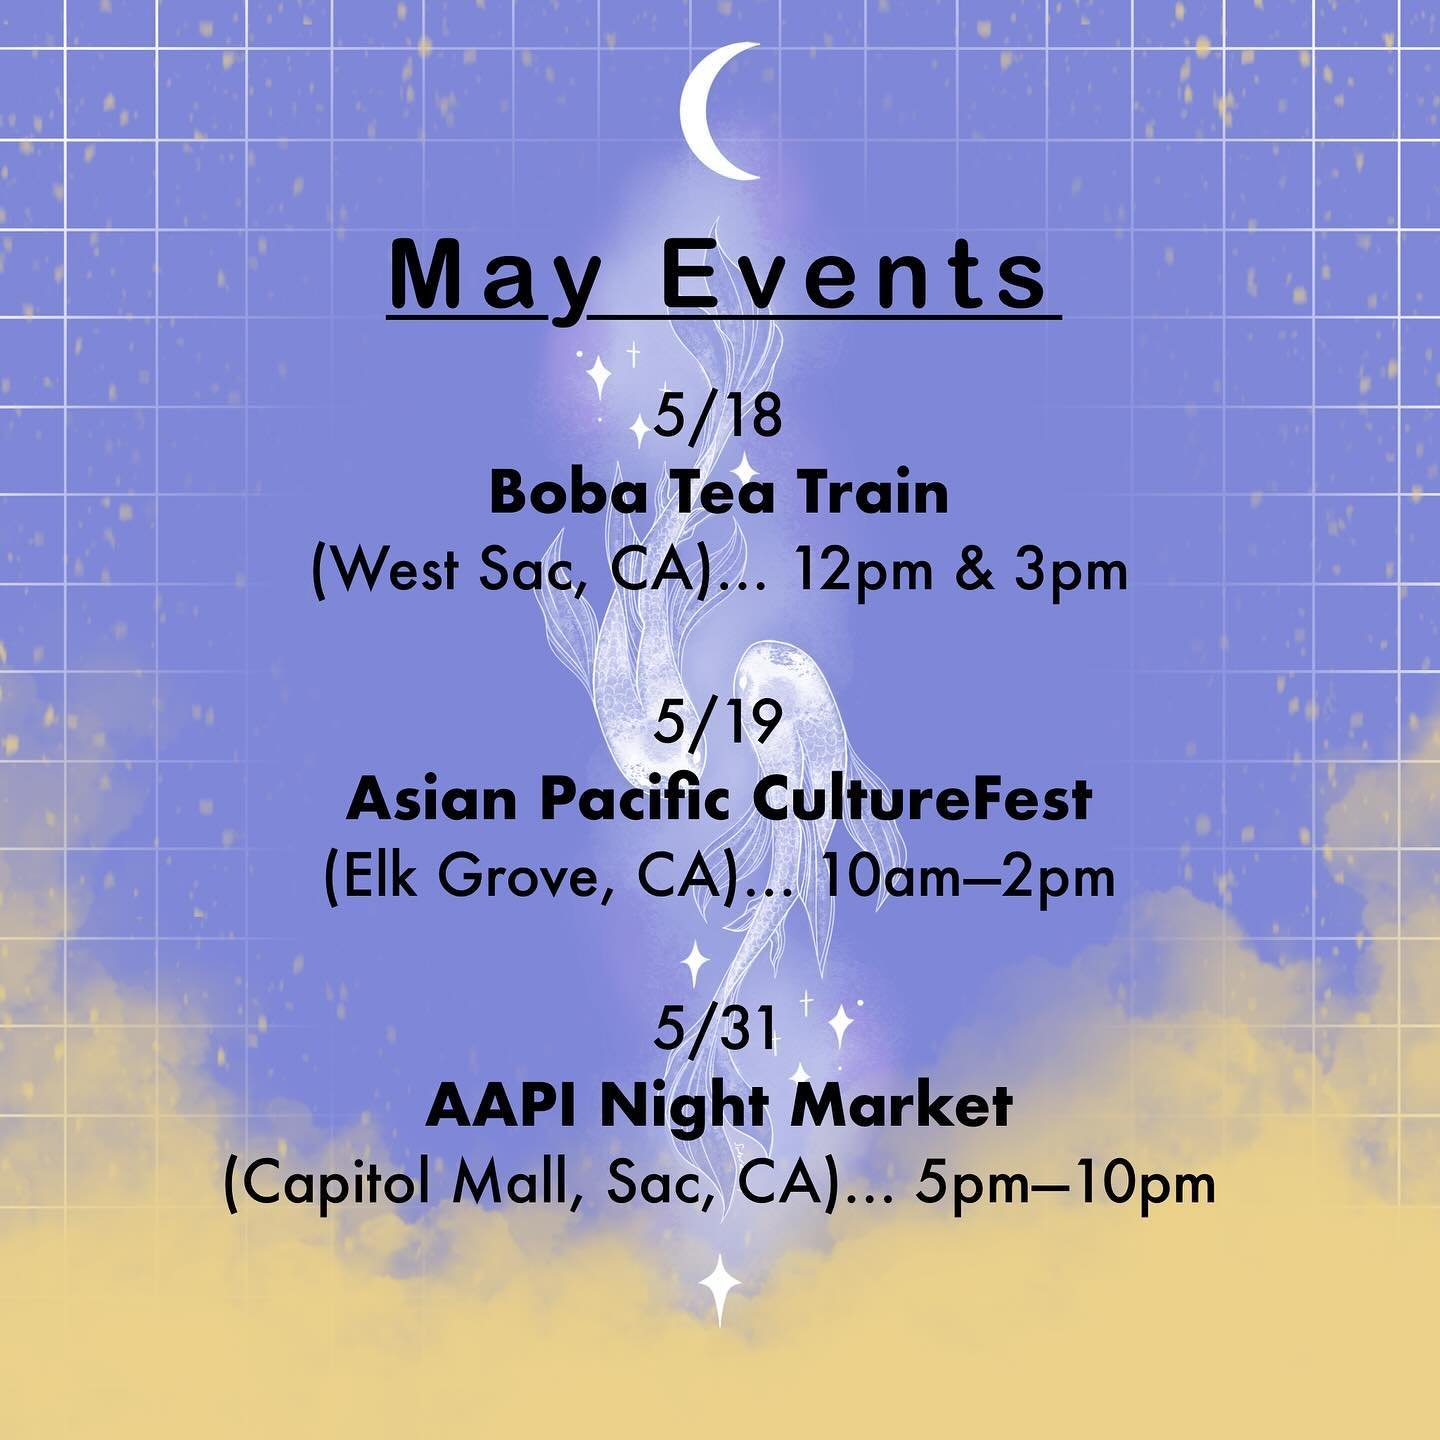 As May approaches, I am ever so excited to revel in these remarkable events that celebrate AAPI Culture &amp; Heritage. I feel so lucky and grateful to be able to participate in these events where I can celebrate and share my culture through art as w